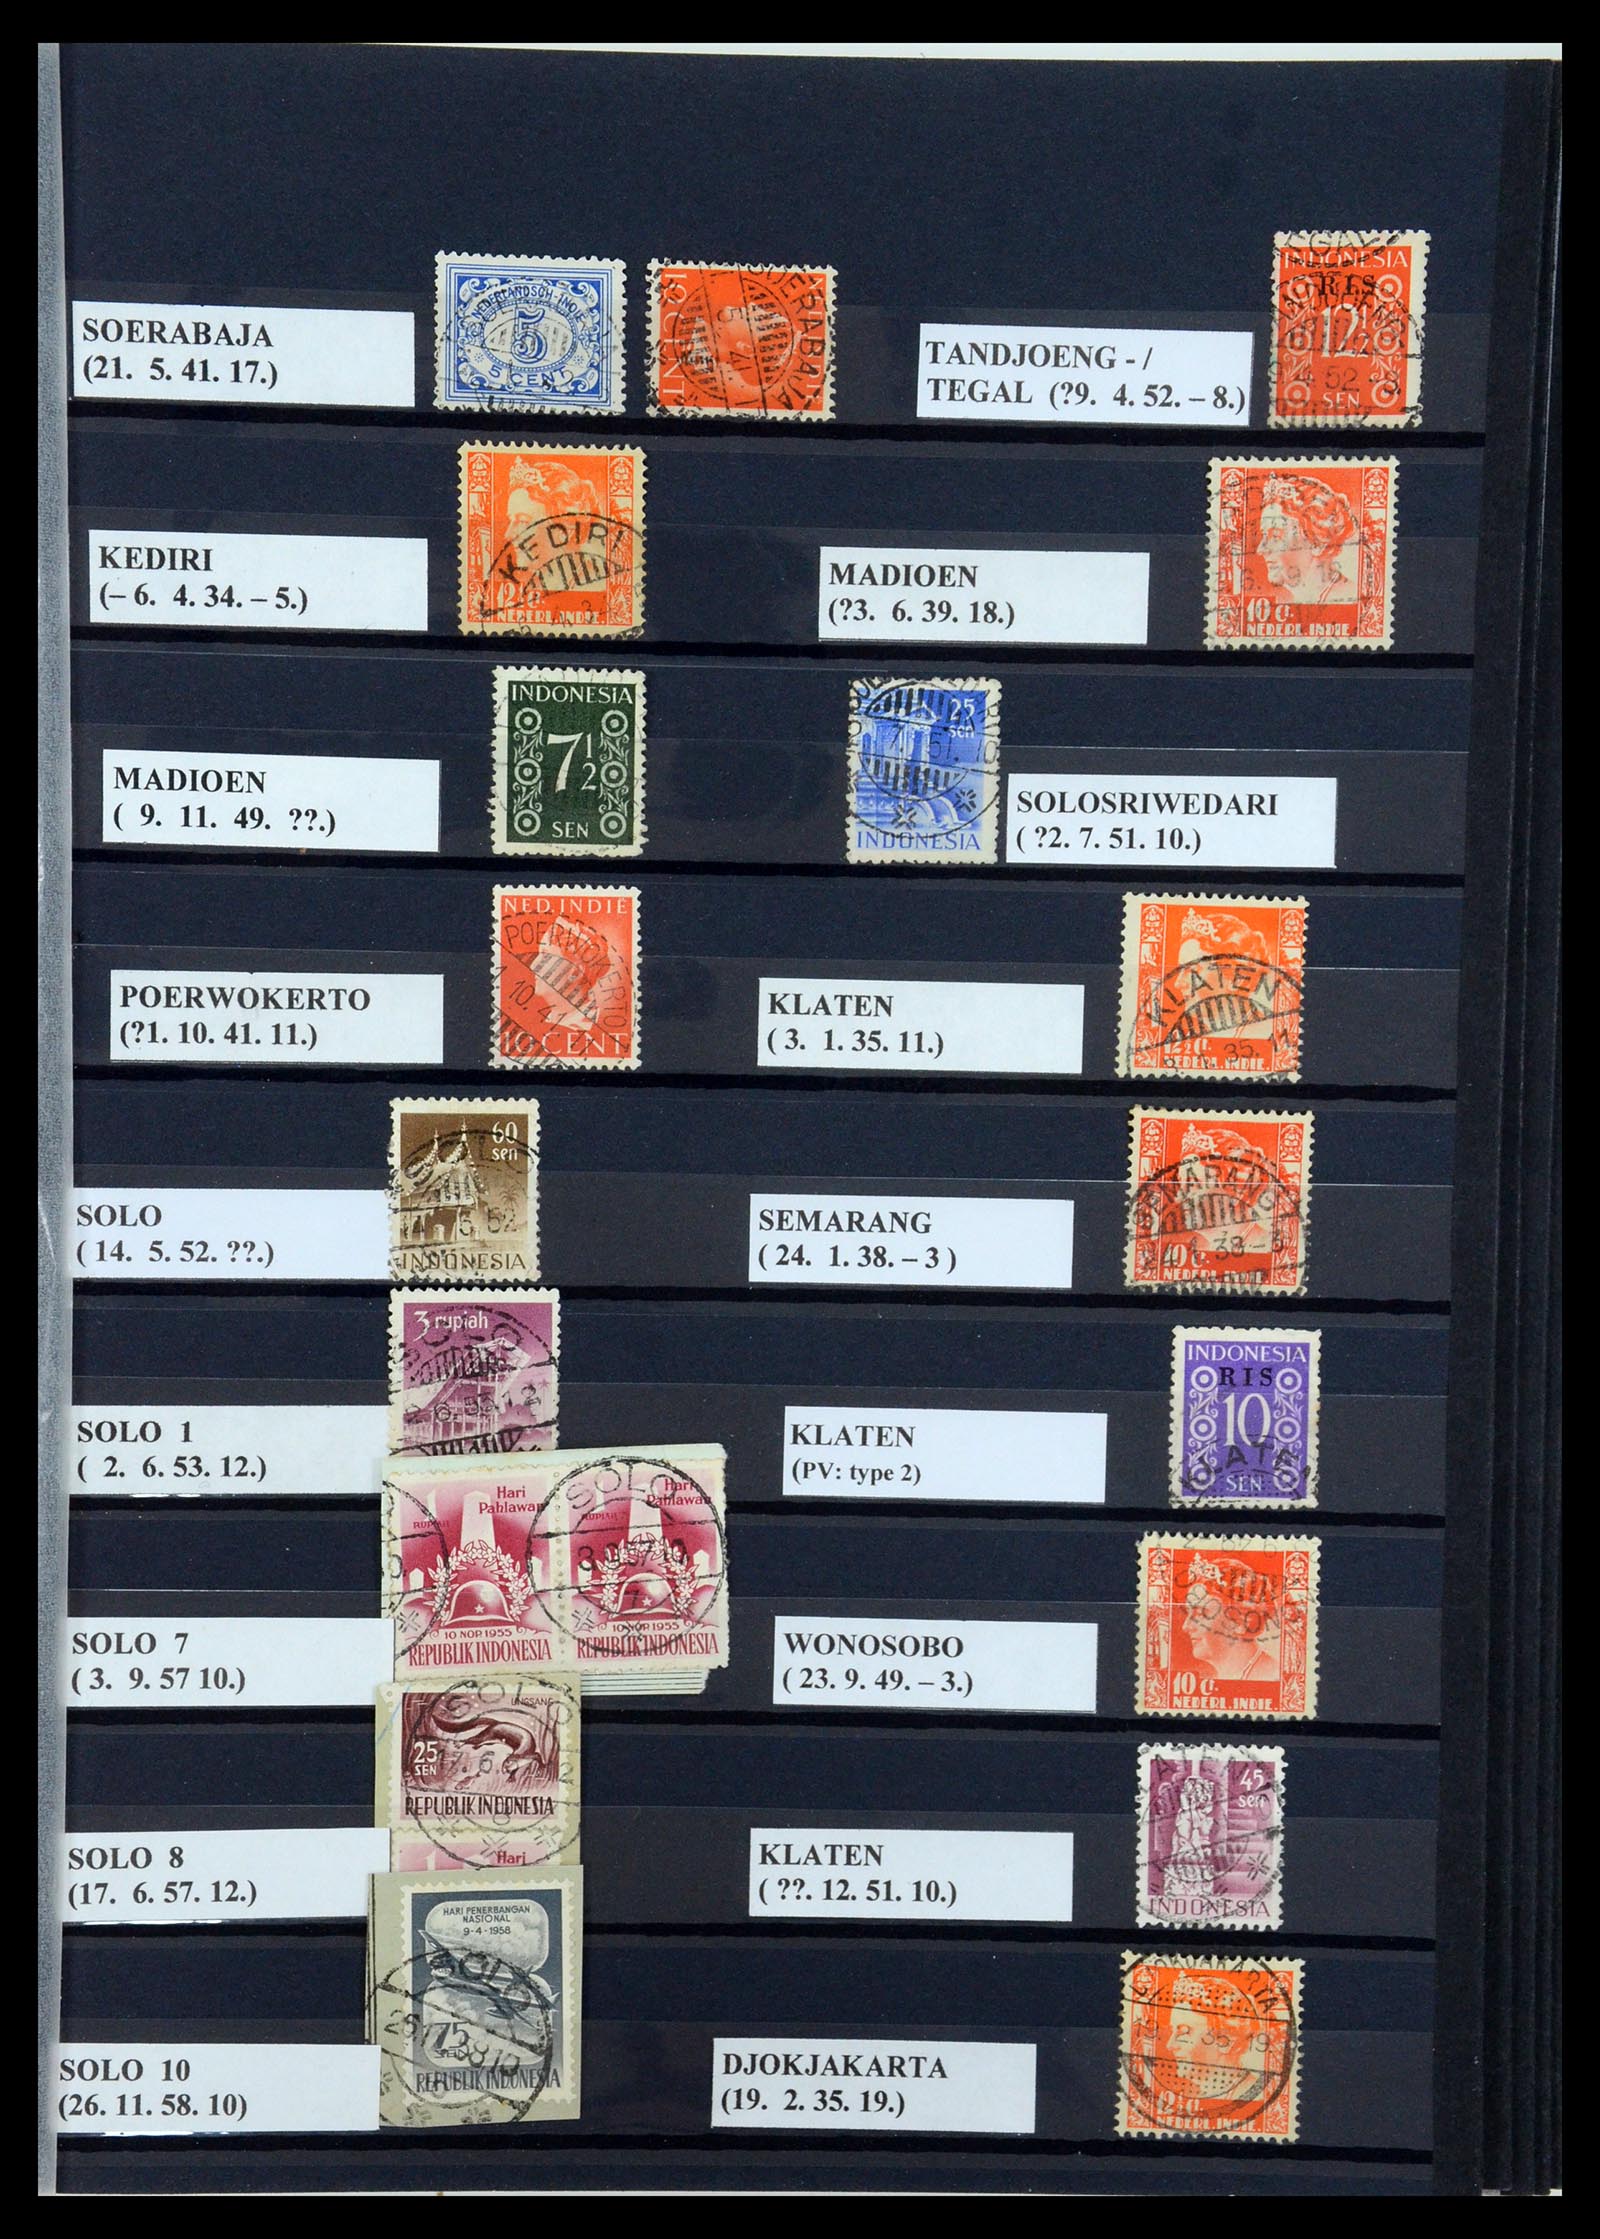 35612 079 - Stamp Collection 35612 Dutch east Indies cancels.